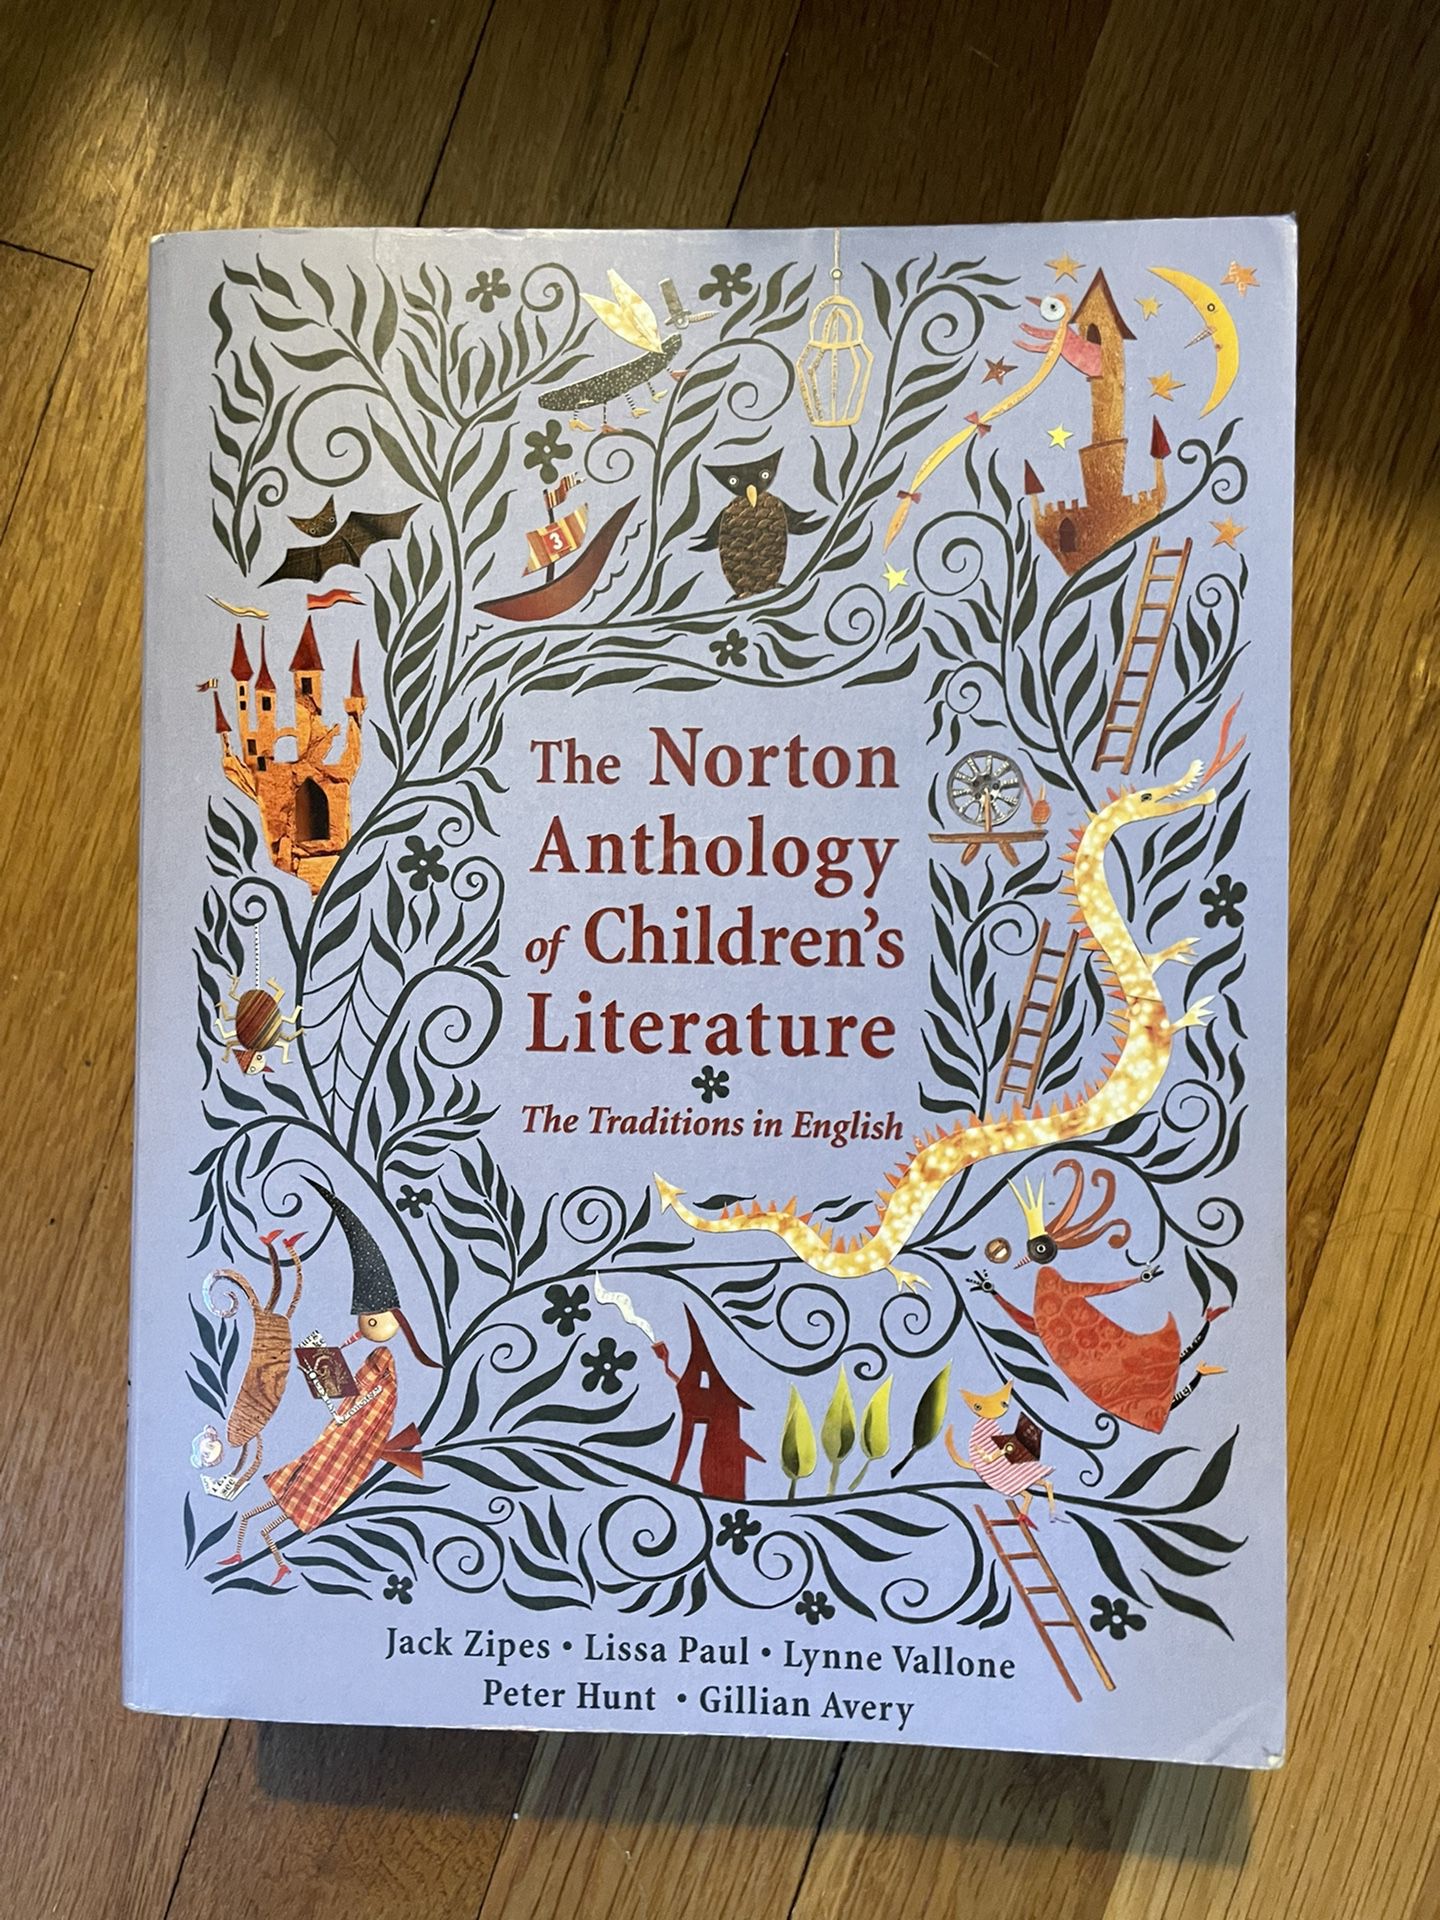 The Norton Anthology of Children's Literature1st edition The Traditions in English